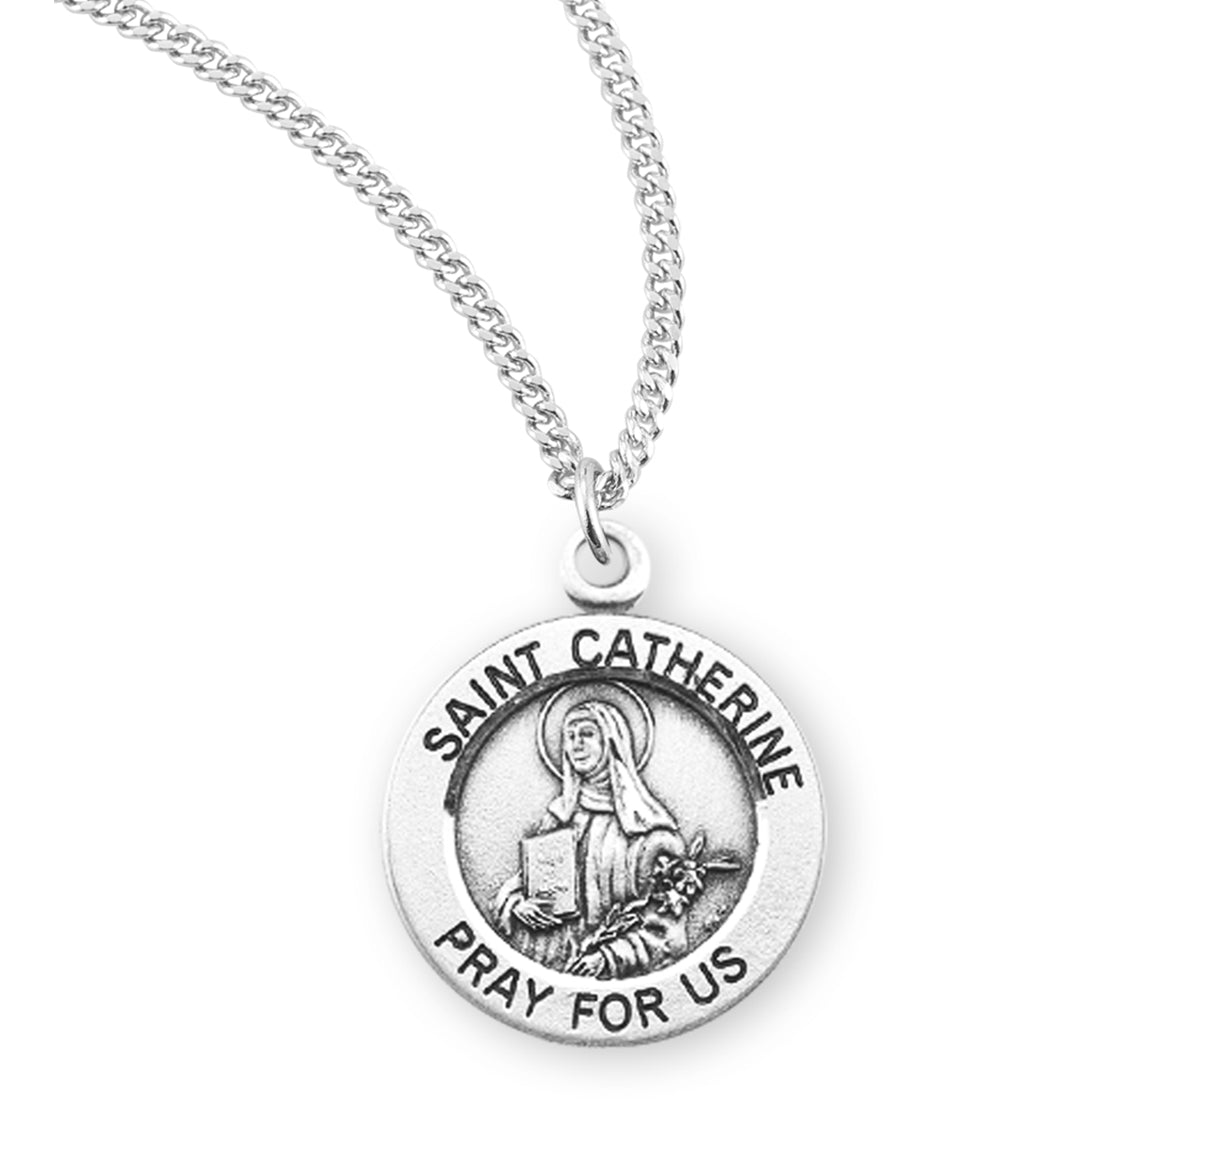 Patron Saint Catherine Round Sterling Silver Medal